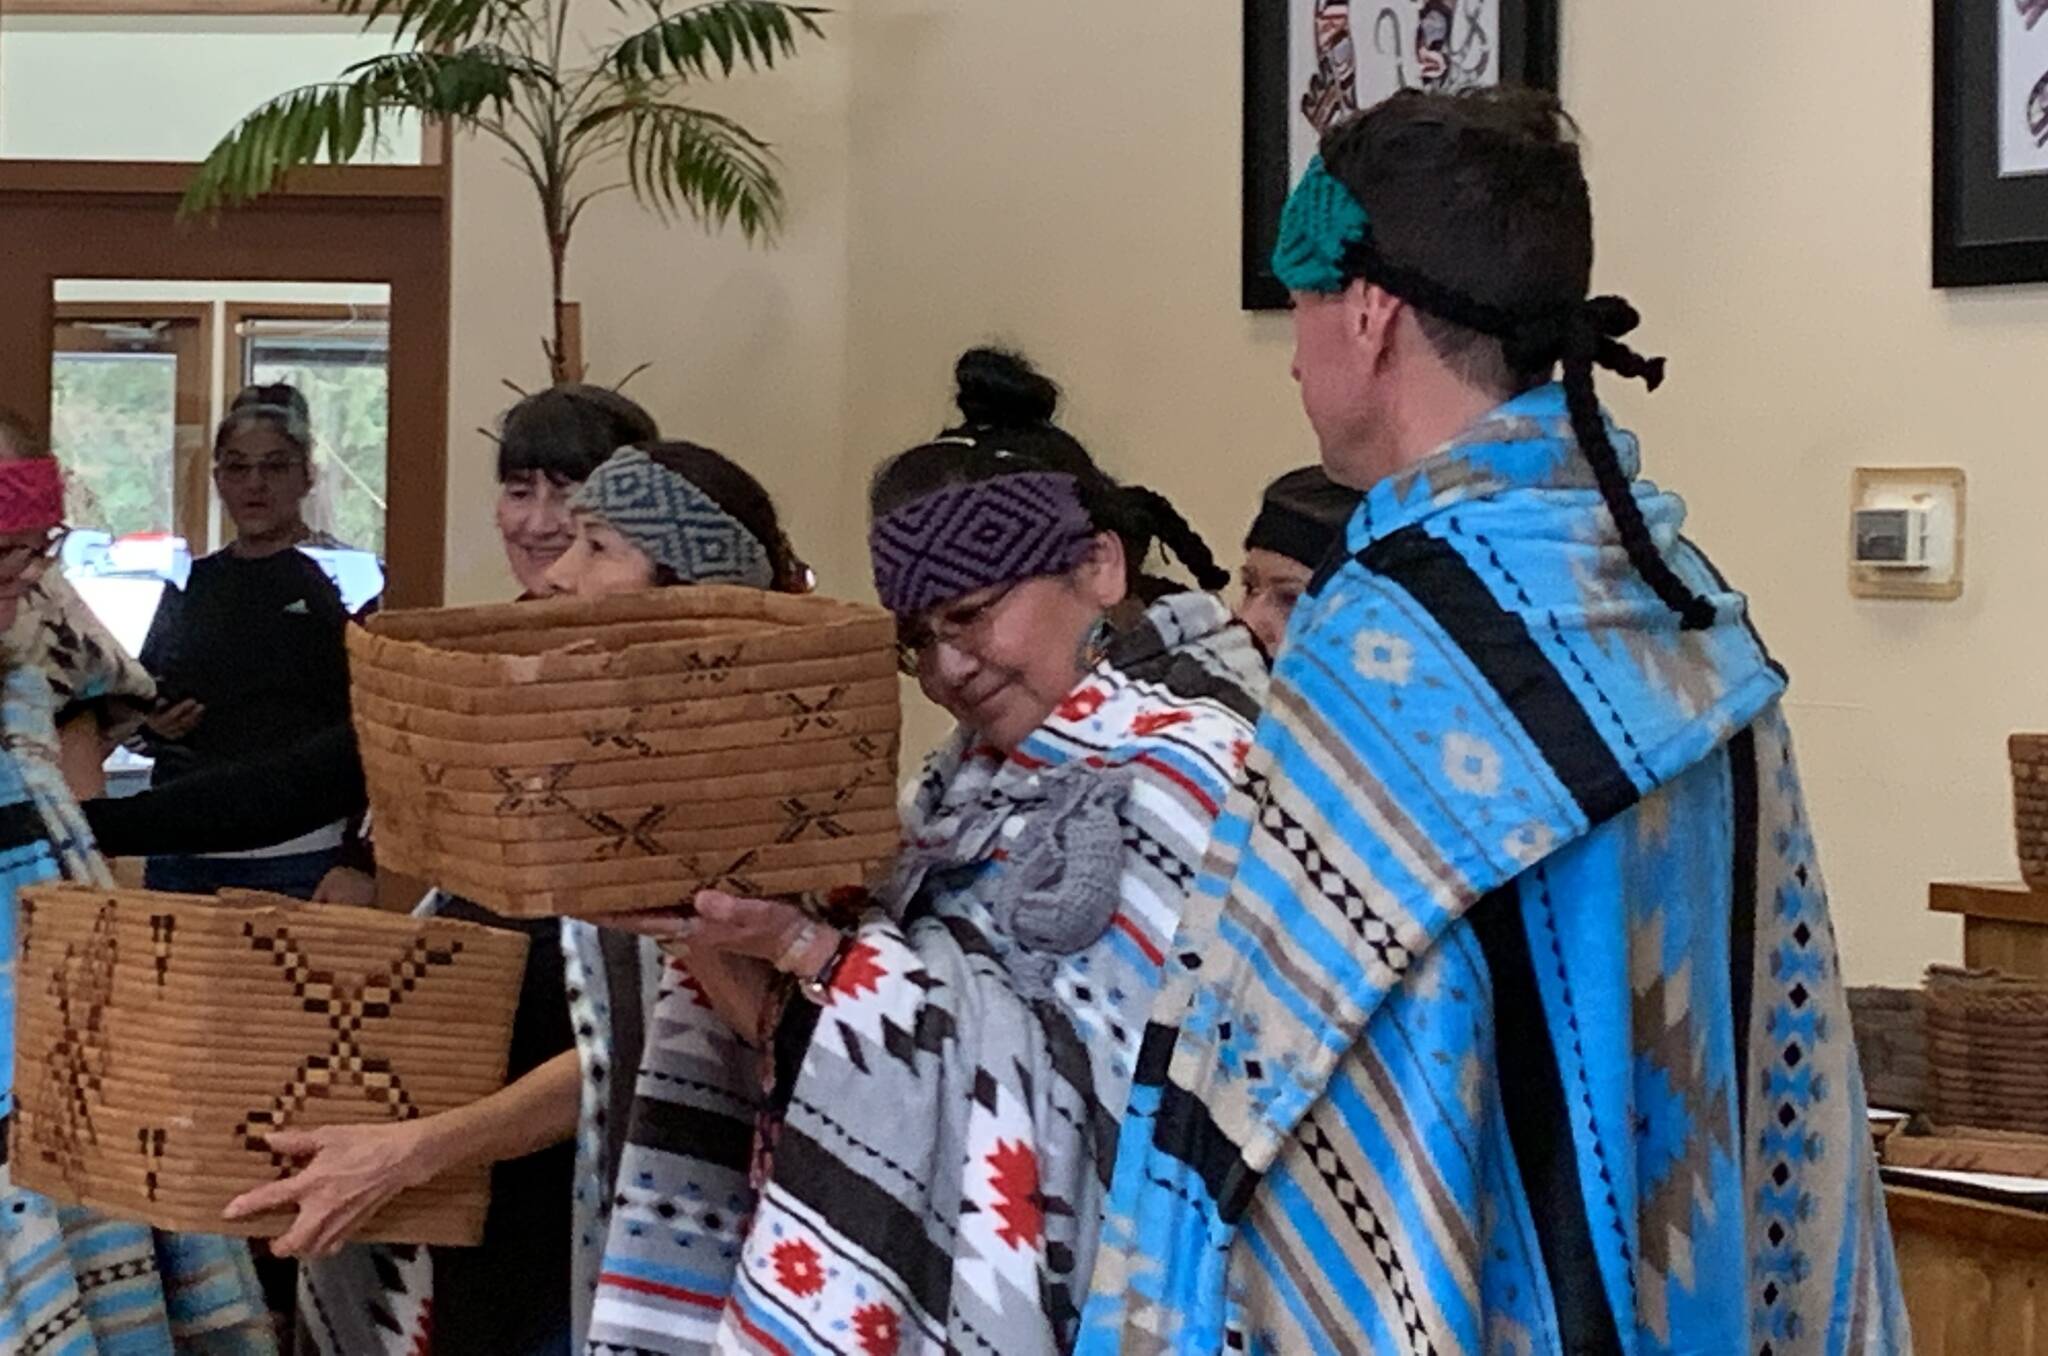 Claudette Leon reacts as she holds a repatriated Sts’ailes basket during a ceremony on Friday, March 3. A total of 29 baskets were returned to the Sts’ailes First Nation. (Adam Louis/Observer)